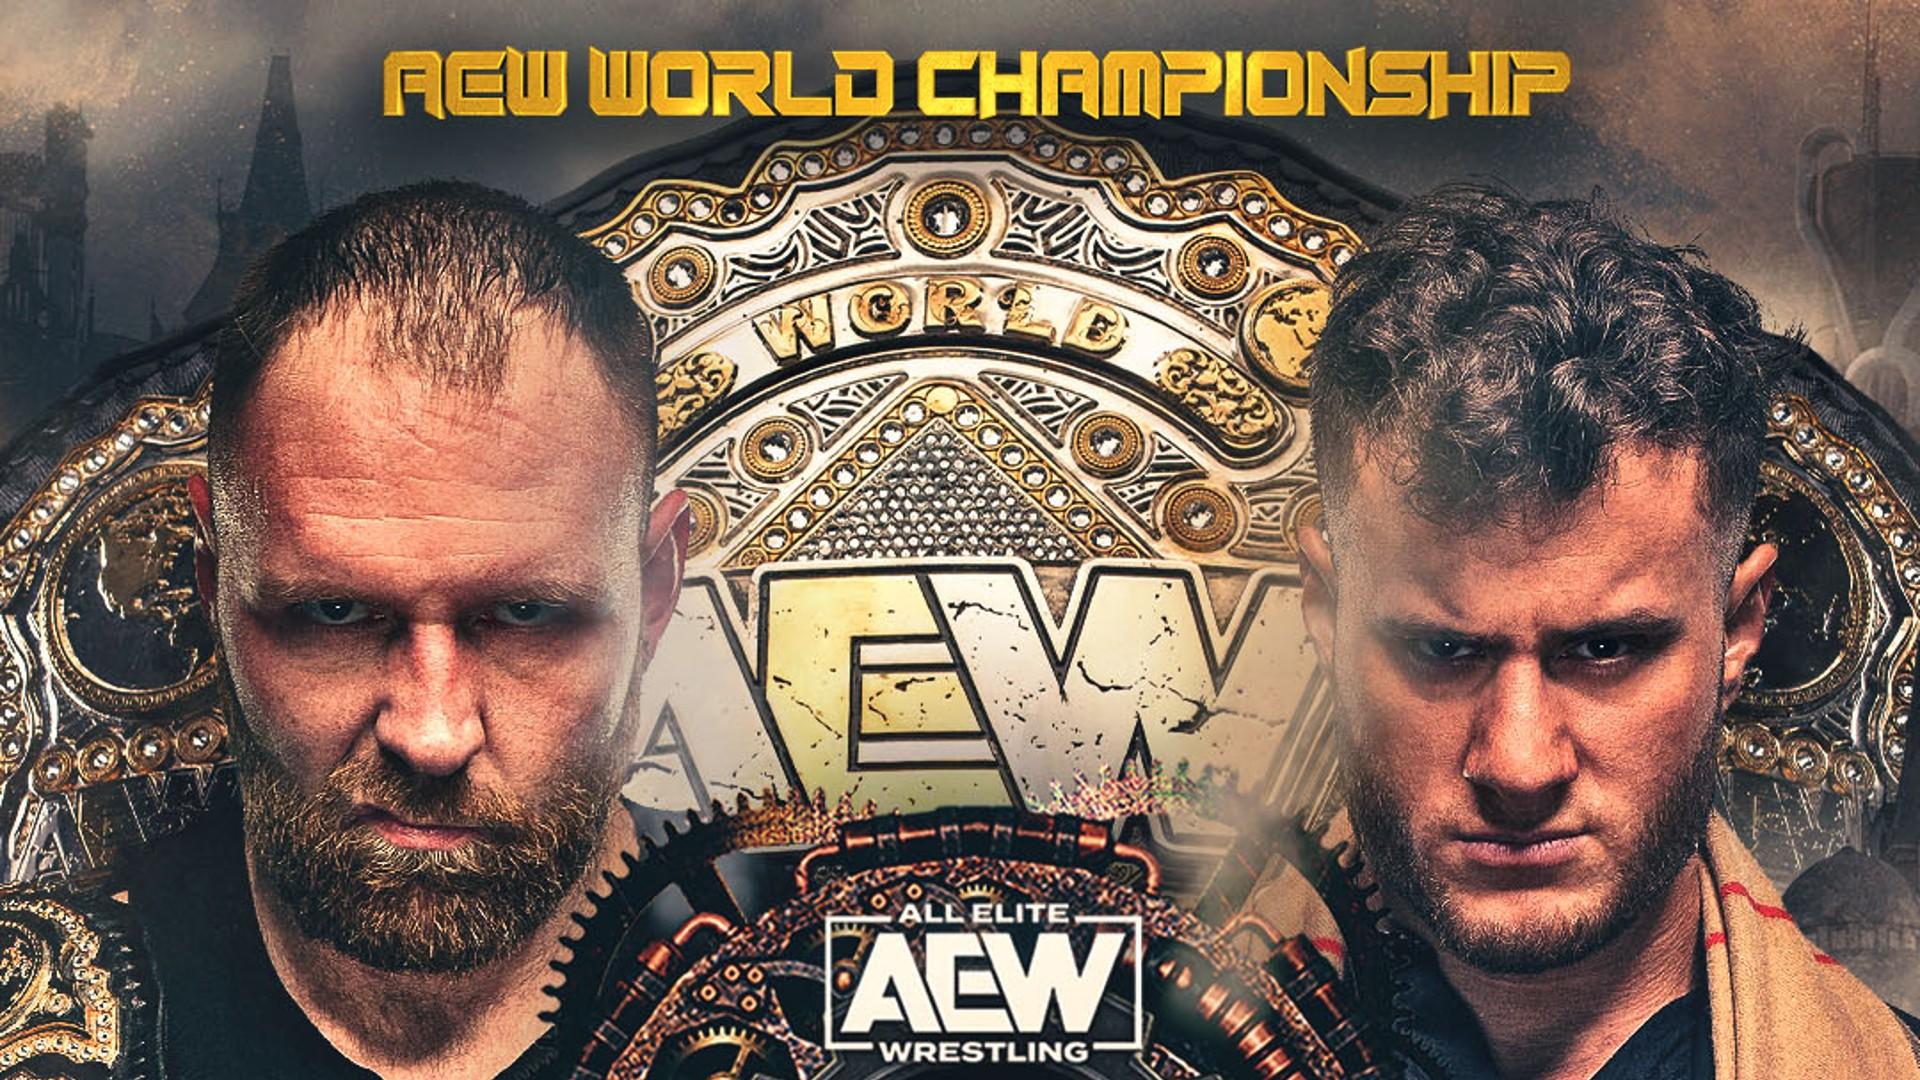 AEW MJF Expected to Return Soon 2point0 Sign Extensions More on WWE  Contacting AEW Talent  TPWW